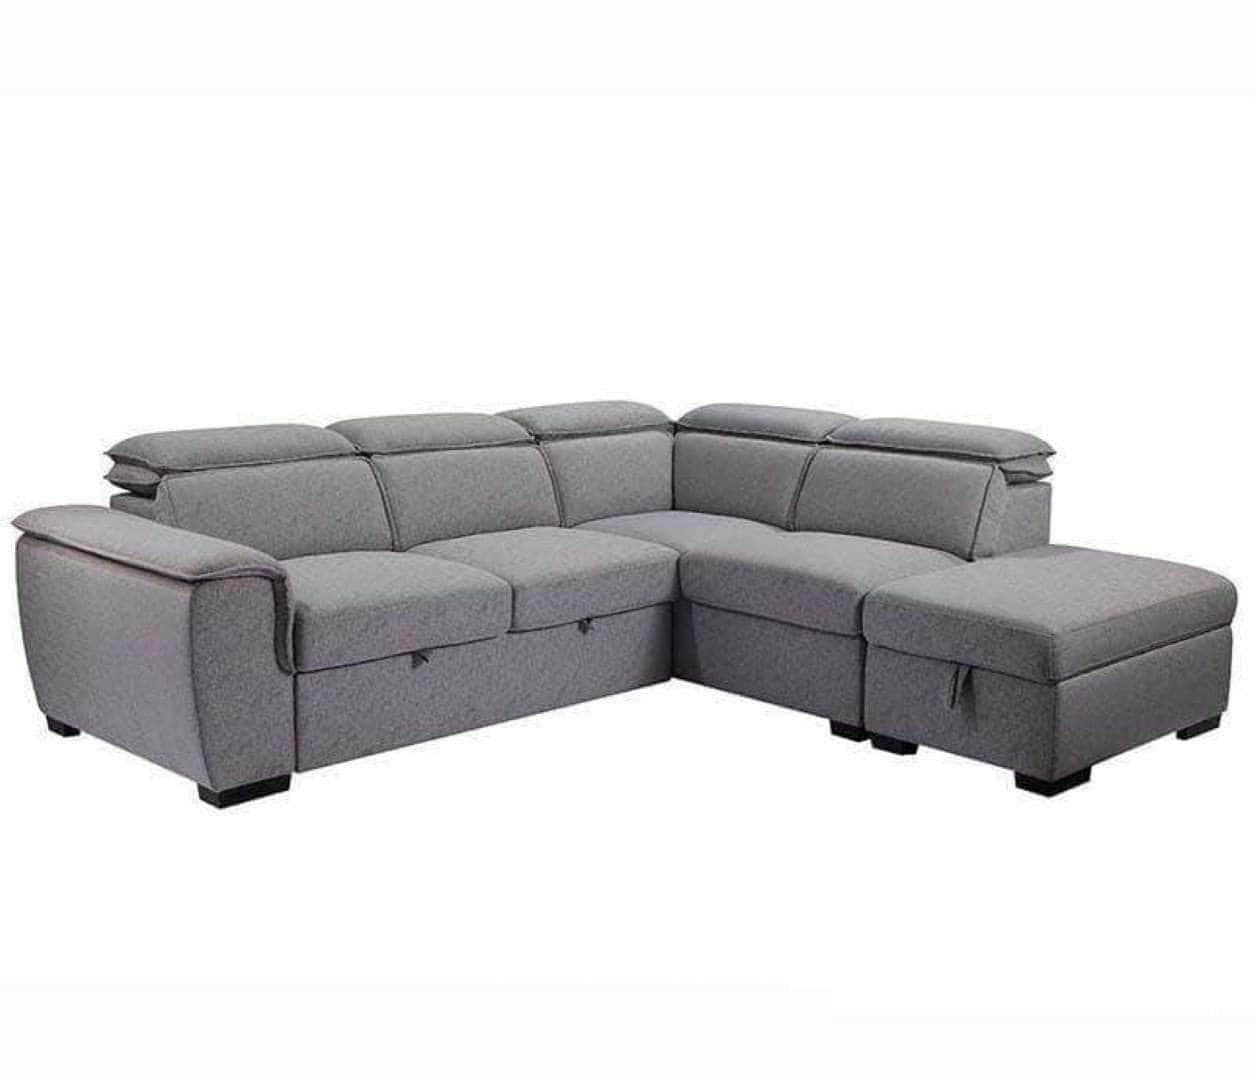 Urban Cali Sleeper Sectional Right Facing Chaise Gerardo Sleeper Sectional Sofa Bed with Storage Ottoman